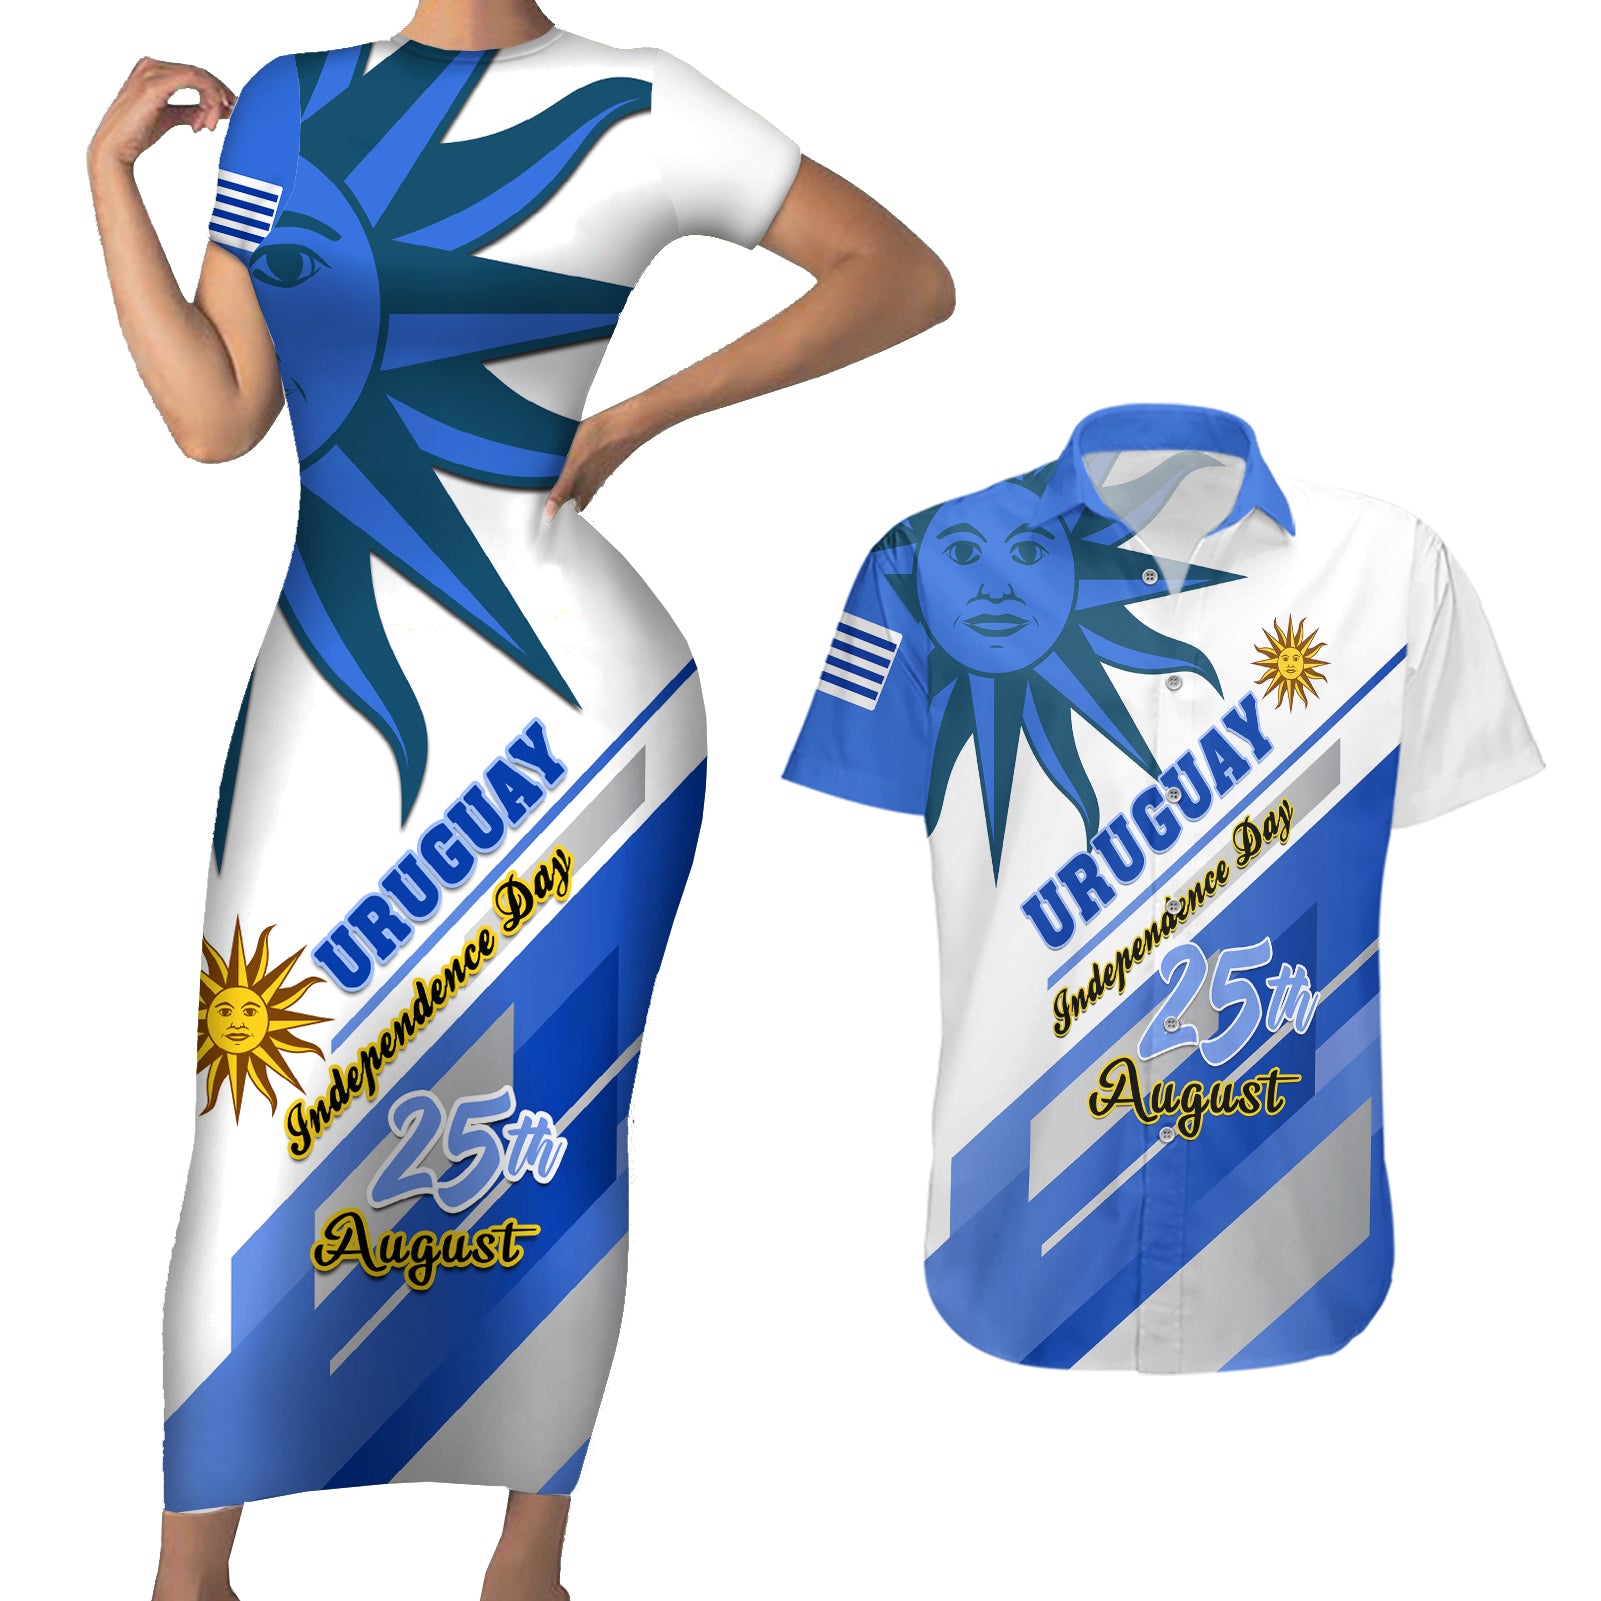 personalised-uruguay-independence-day-couples-matching-short-sleeve-bodycon-dress-and-hawaiian-shirt-uruguayan-sol-de-mayo-special-version